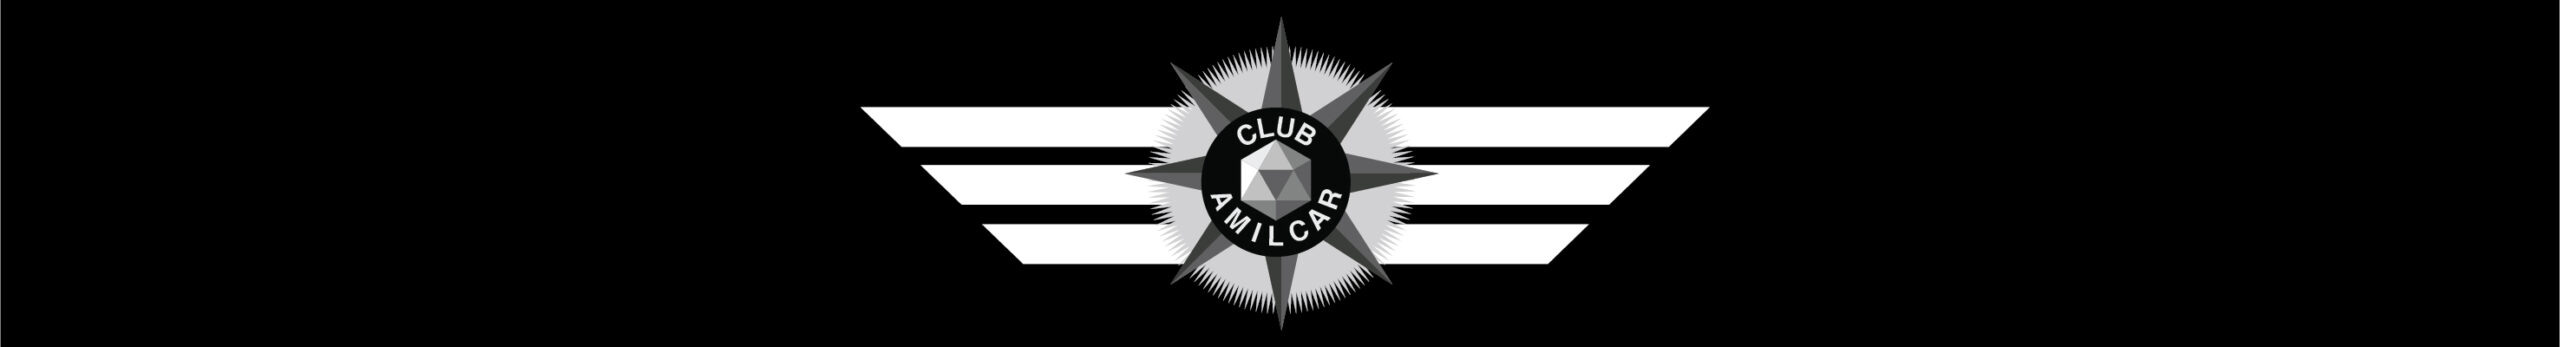 AMILCAR WATCHES by Amilcar Magazine Group.